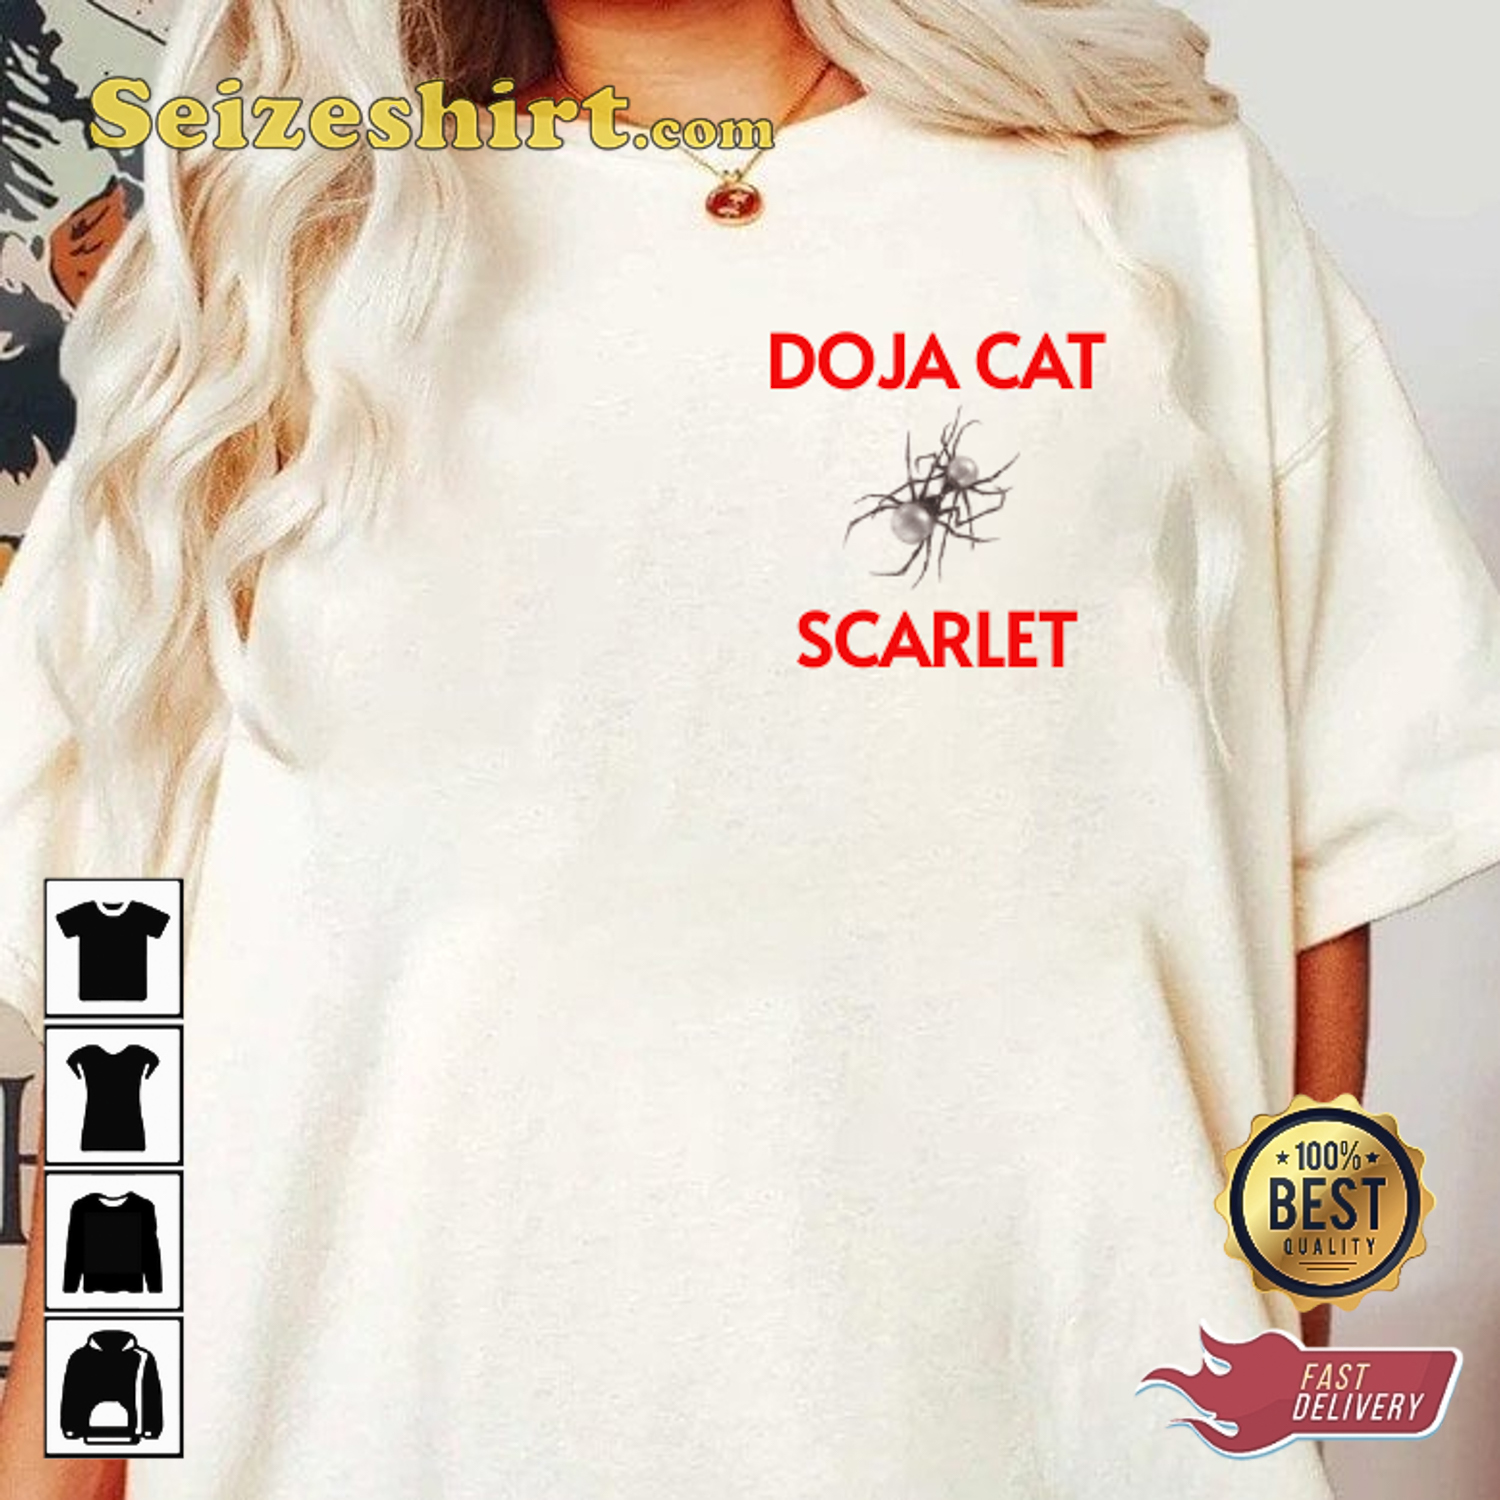 Doja Cat's 'Scarlet' has fans bewitched